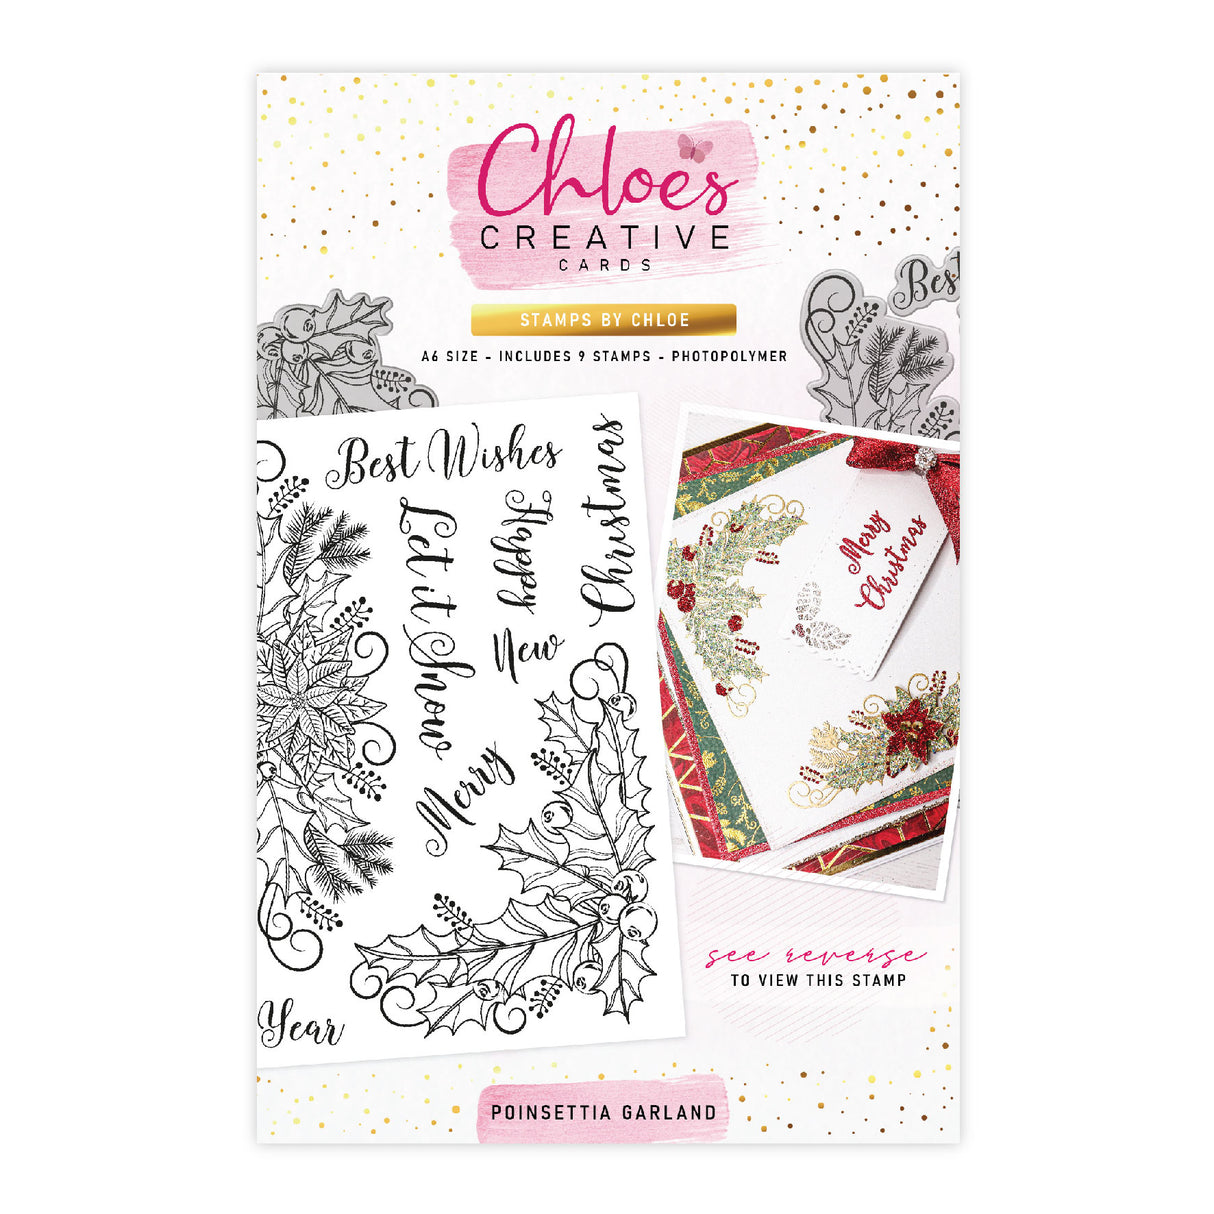 Chloes Creative Cards Photopolymer Stamp Set (A6) - Poinsettia Garland